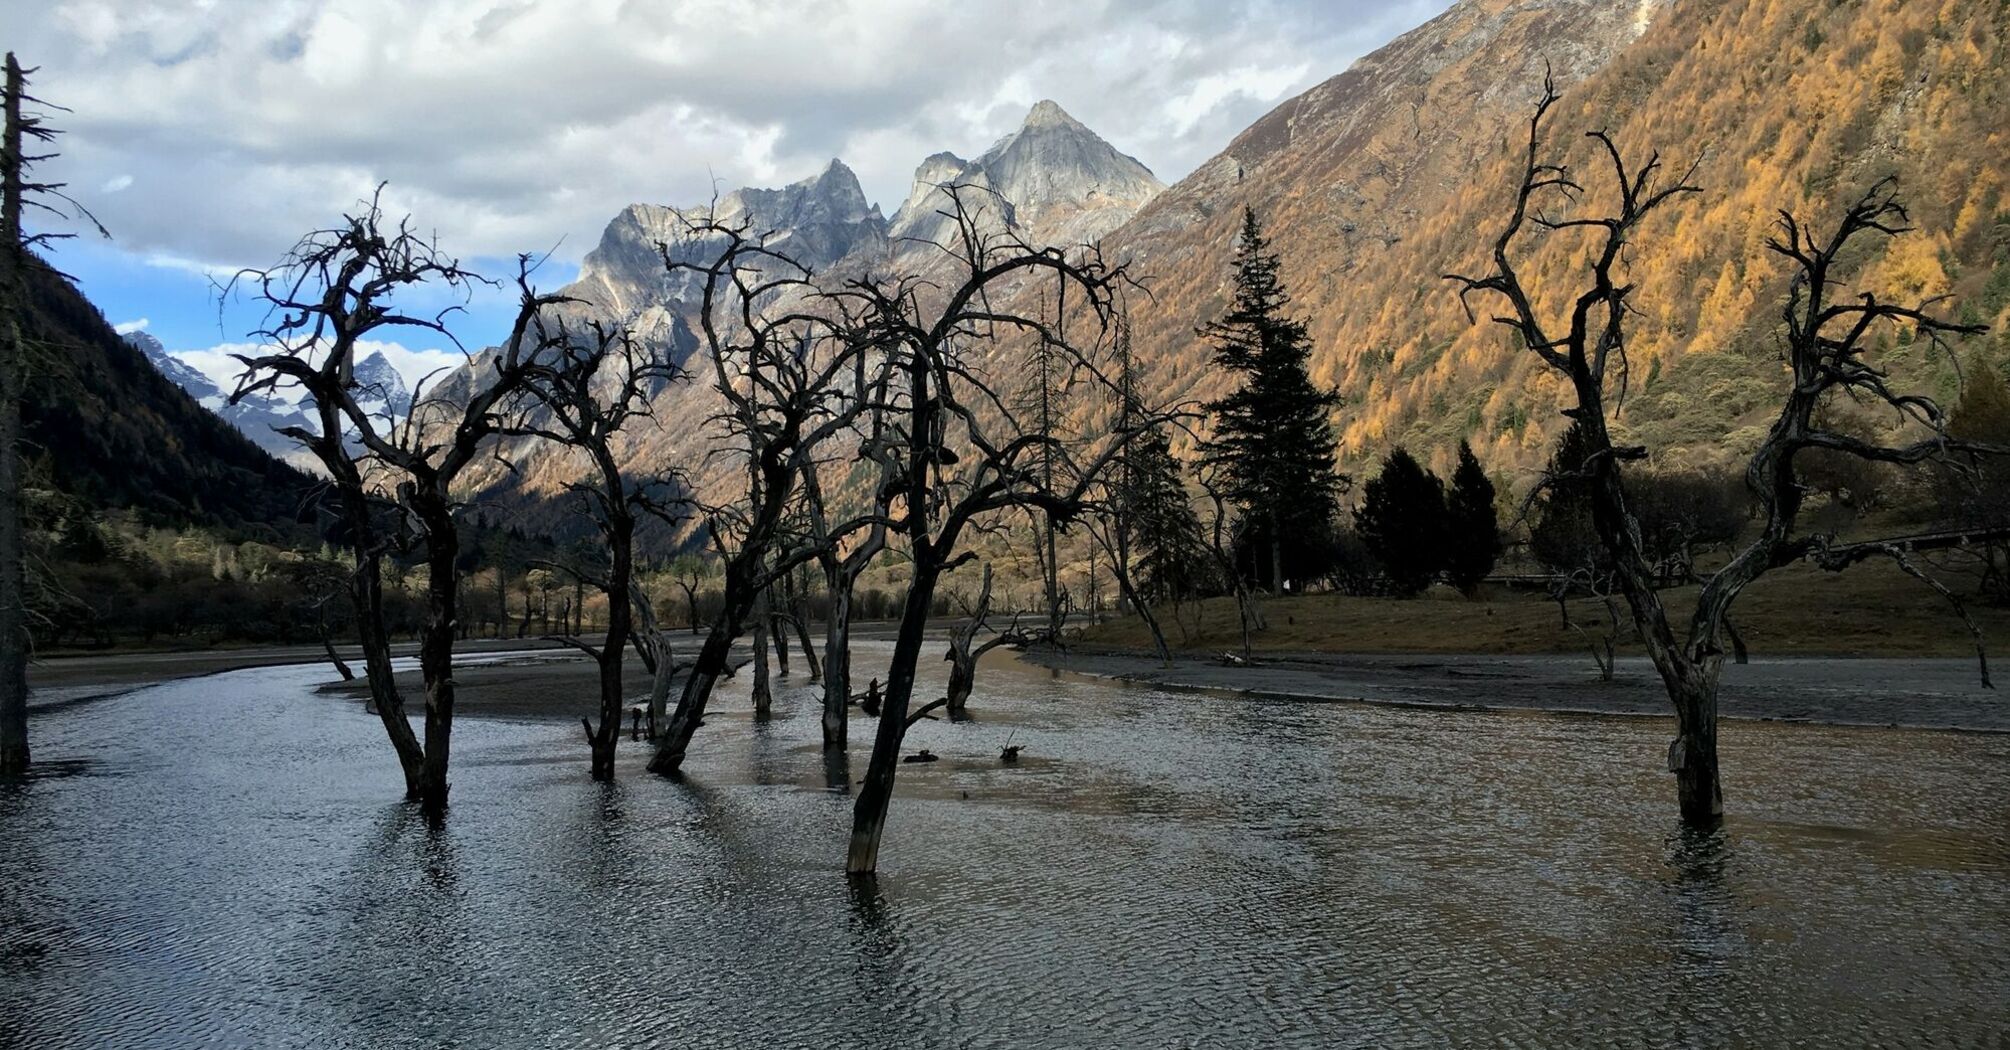 Flooded area with bare trees and mountains in the background